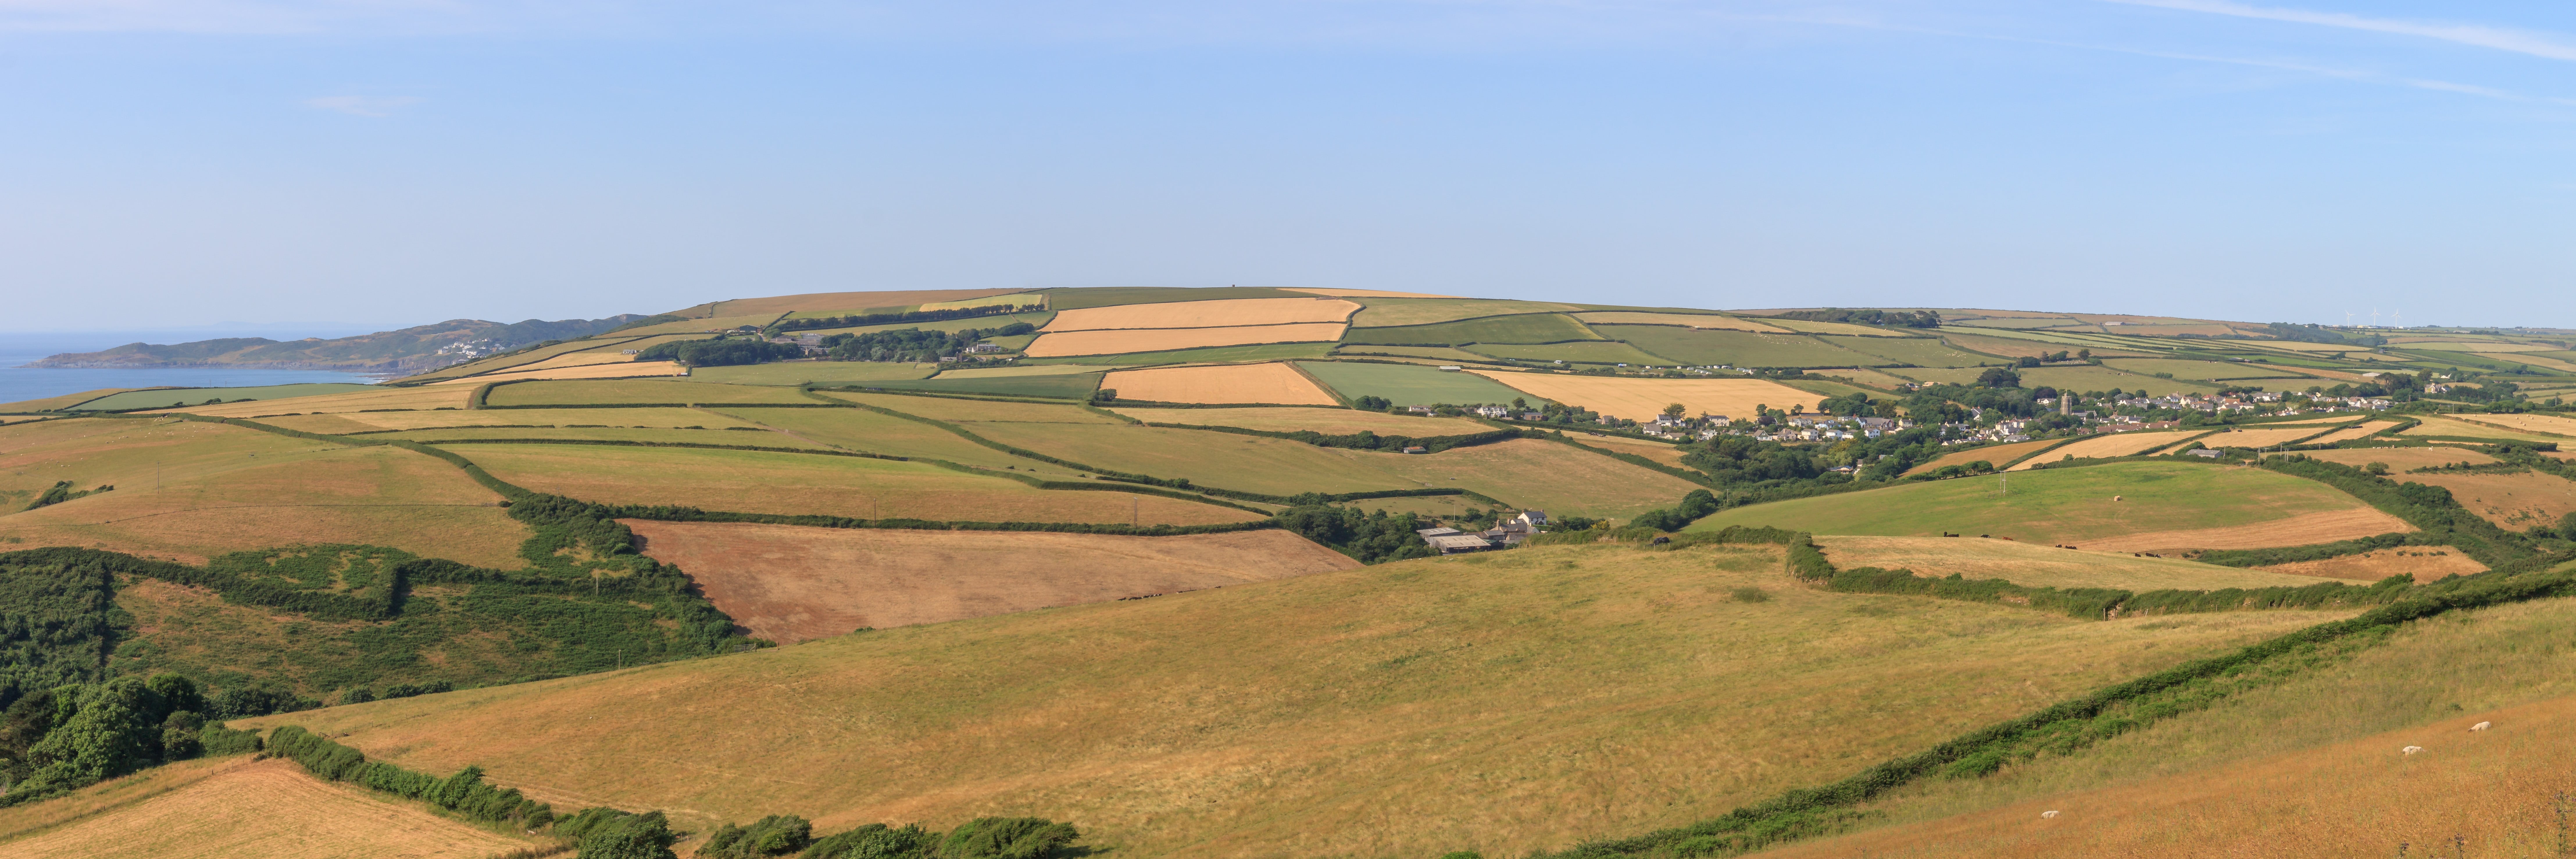 Georgeham and Woolacombe Down from Saunton Down, July 2018